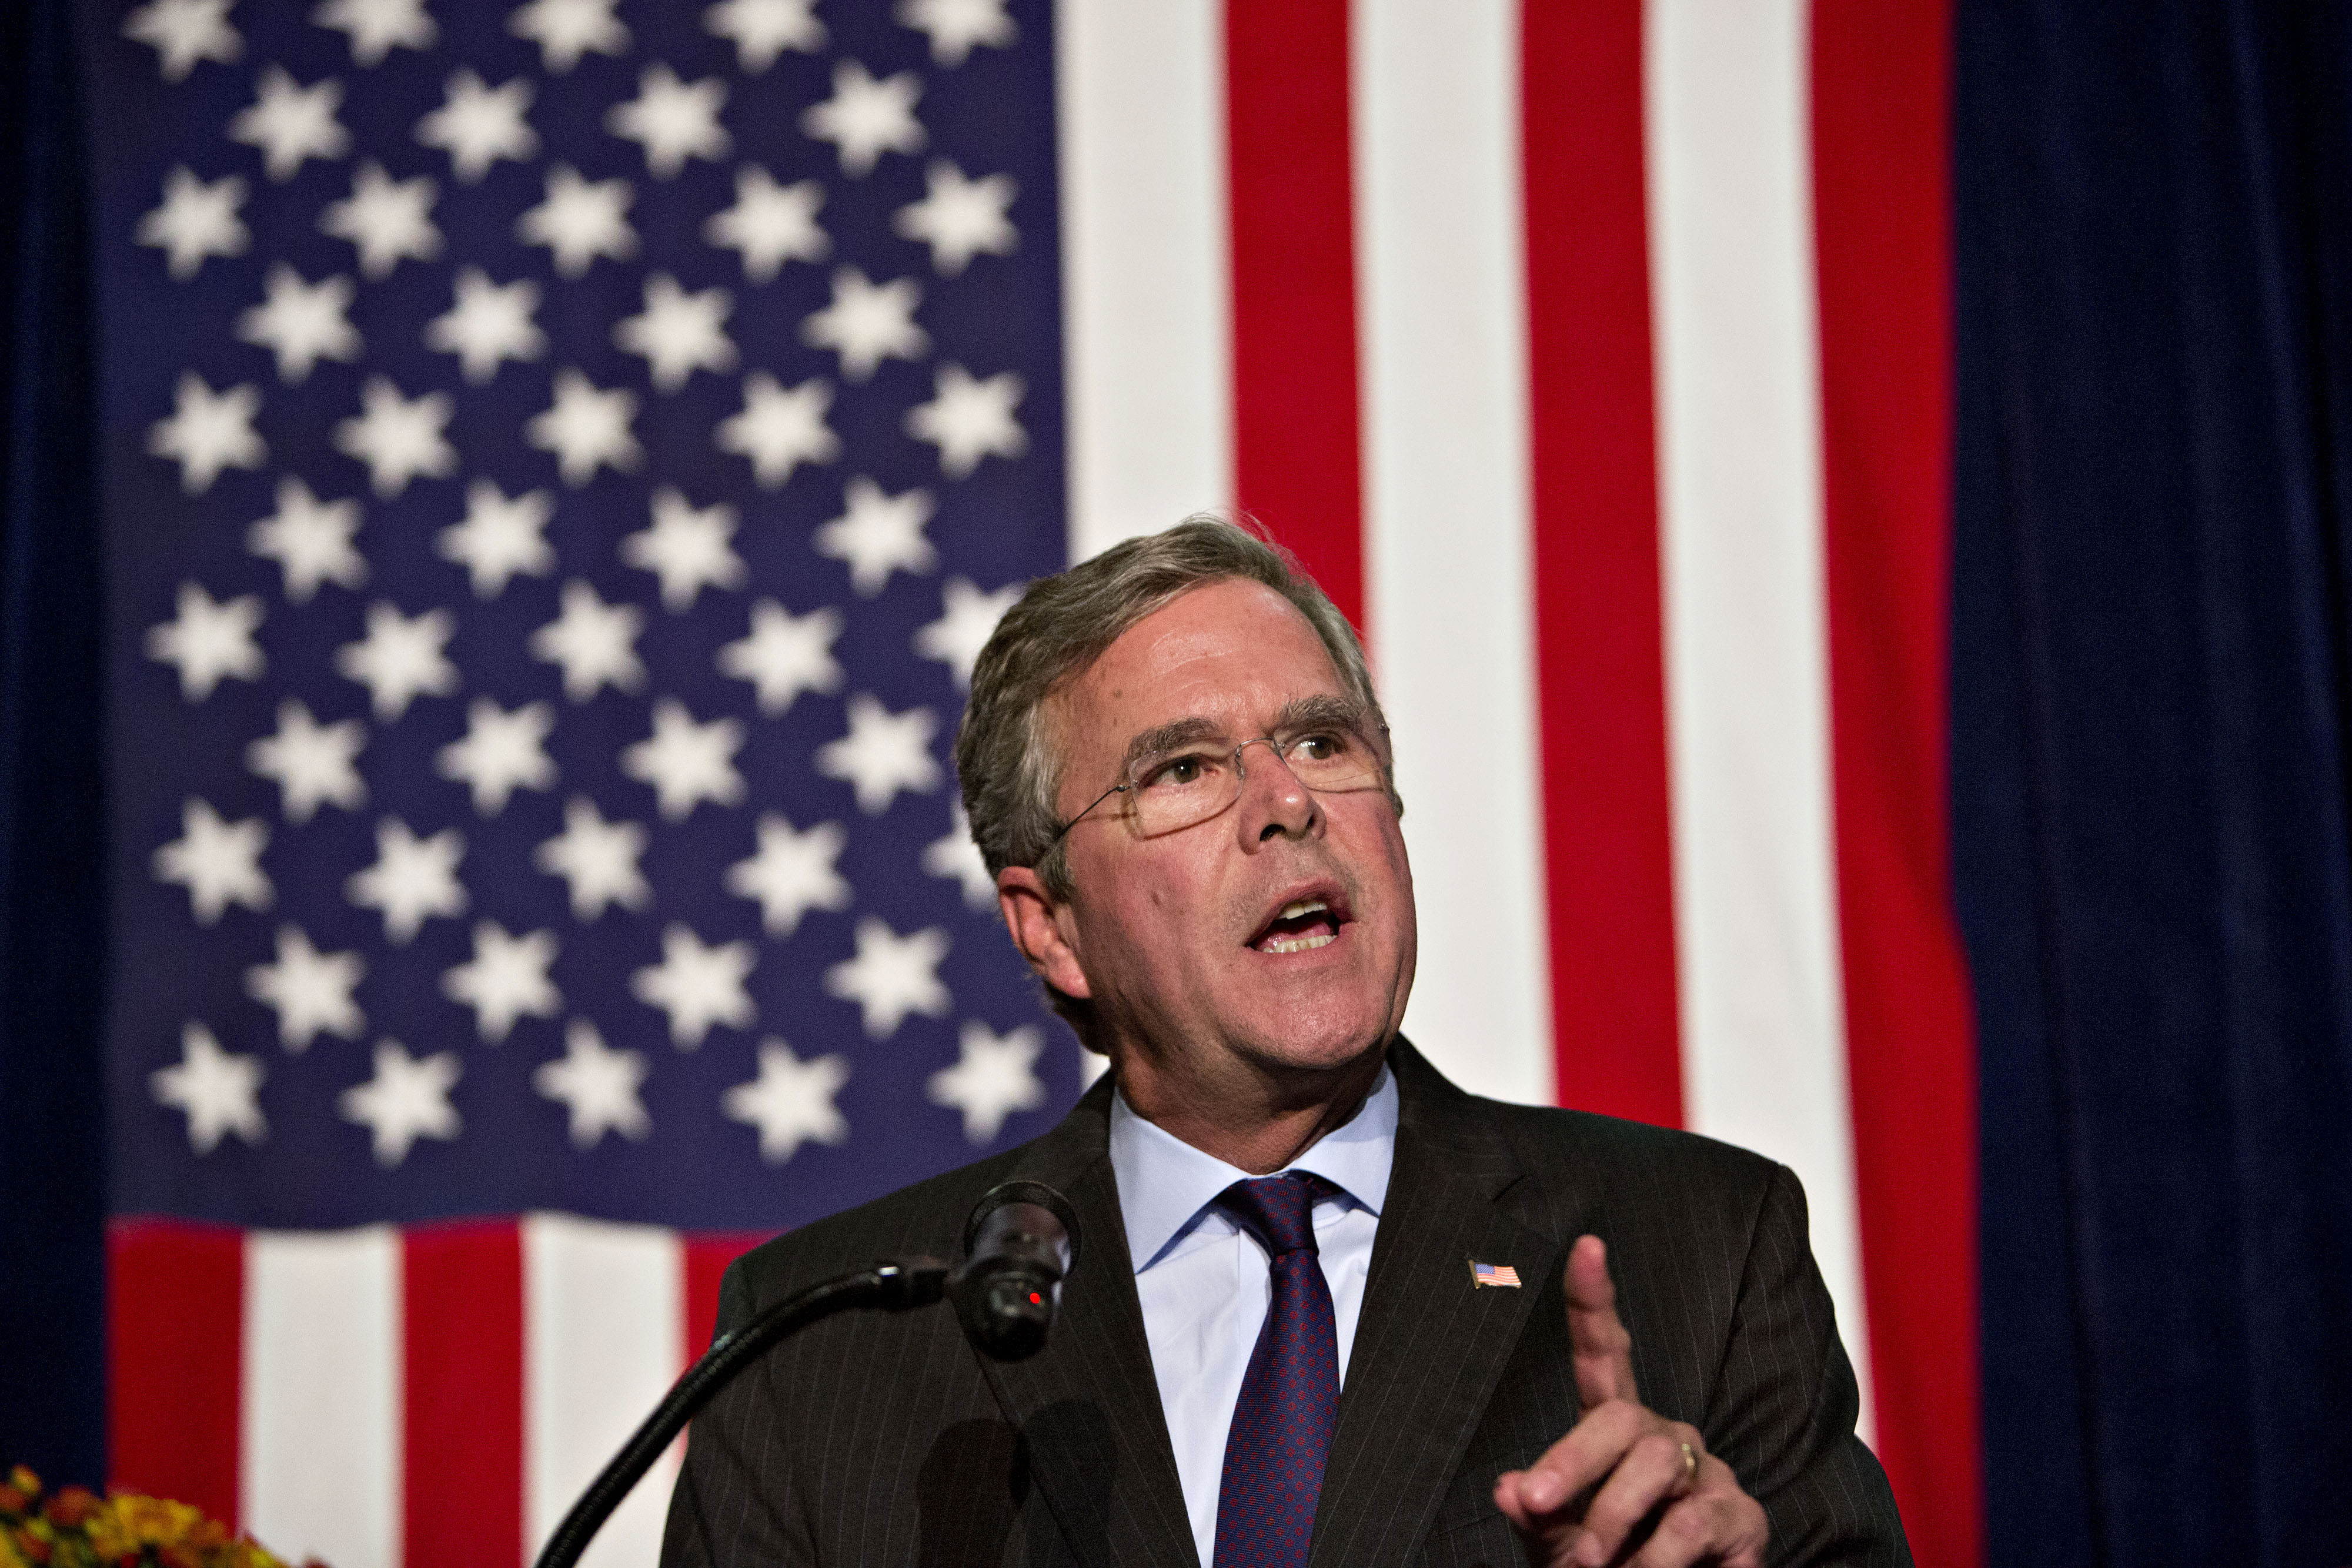 Jeb Bush, former Governor of Florida and 2016 Republican presidential candidate, speaks during the Scott County Republican party Ronald Reagan Dinner in Davenport, Iowa, U.S., on Oct. 6, 2015.